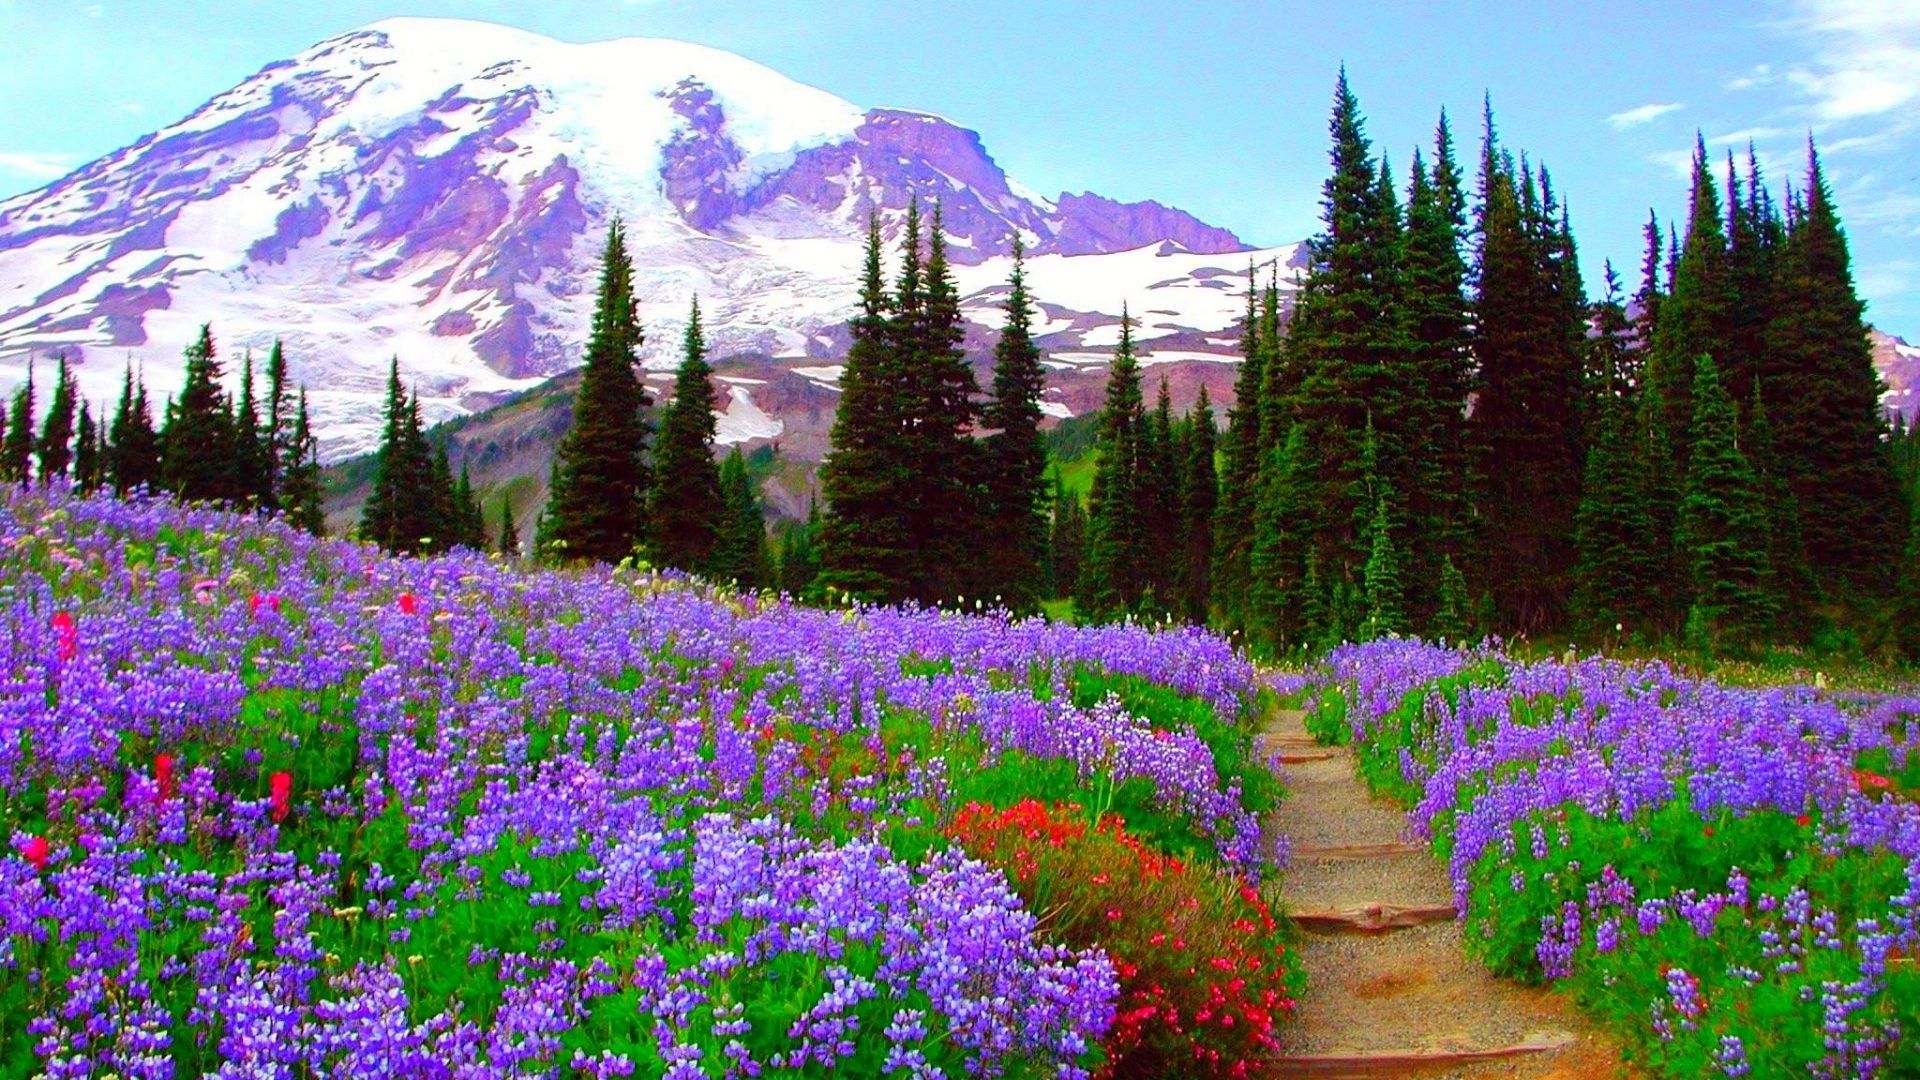 Forest Spring Mountains Green Flowers Path Wildflower In The Mountains HD Wallpaper